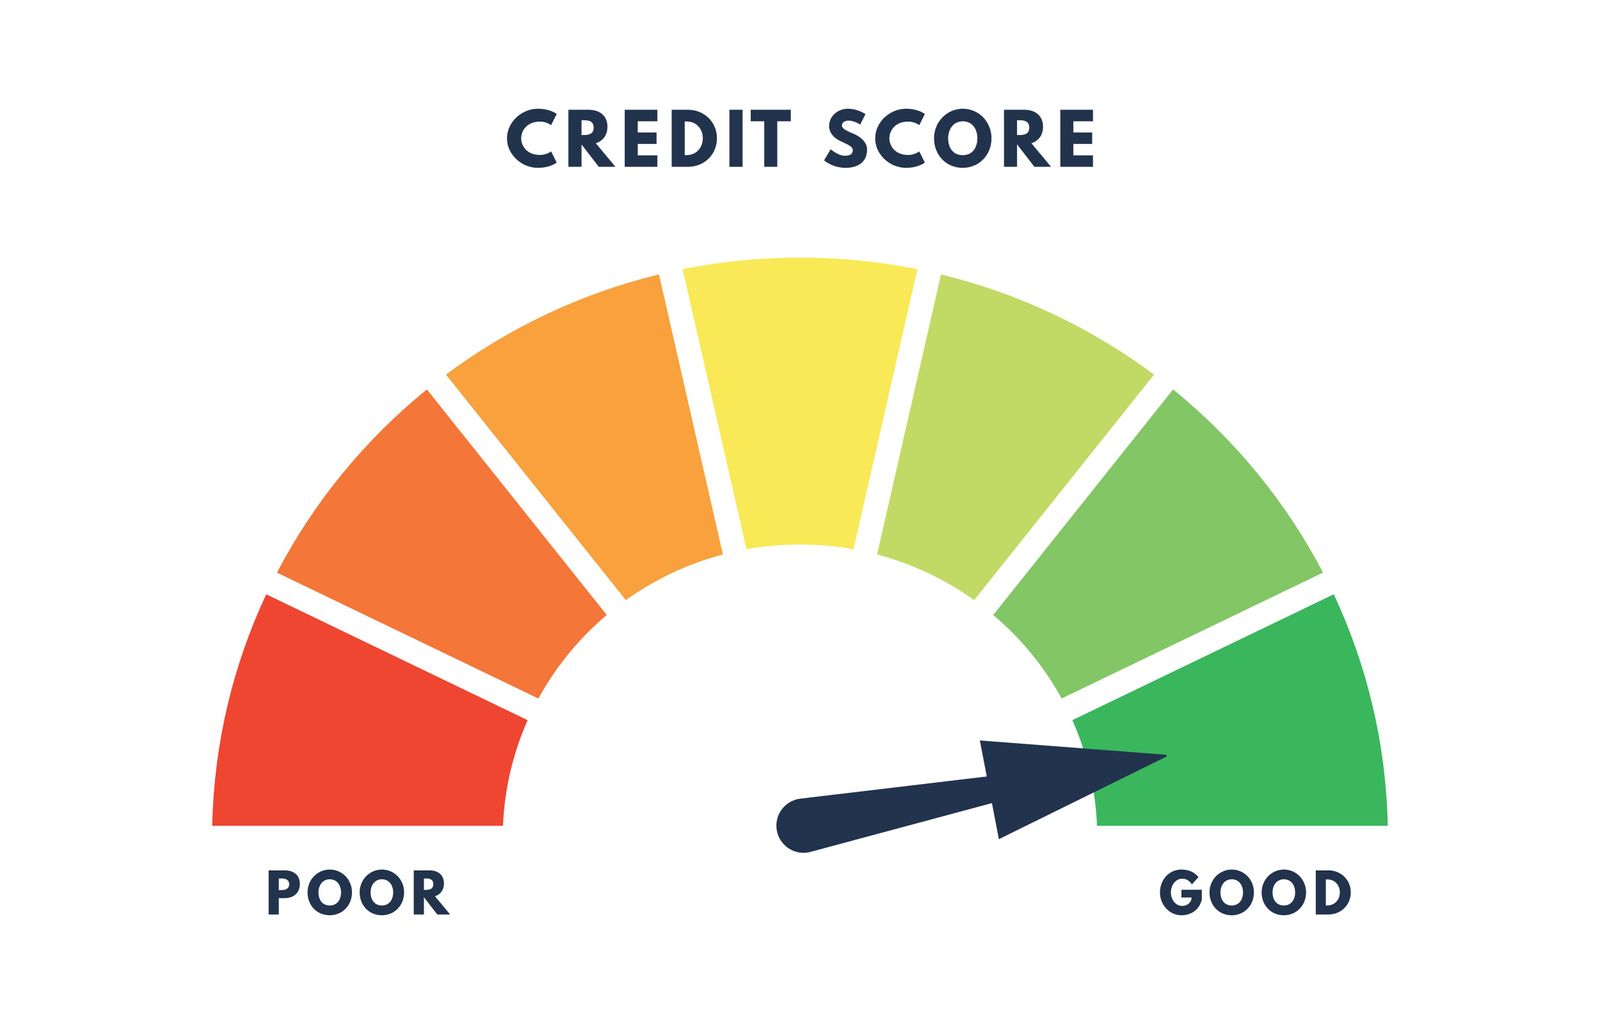 Monitor your credit rating and score